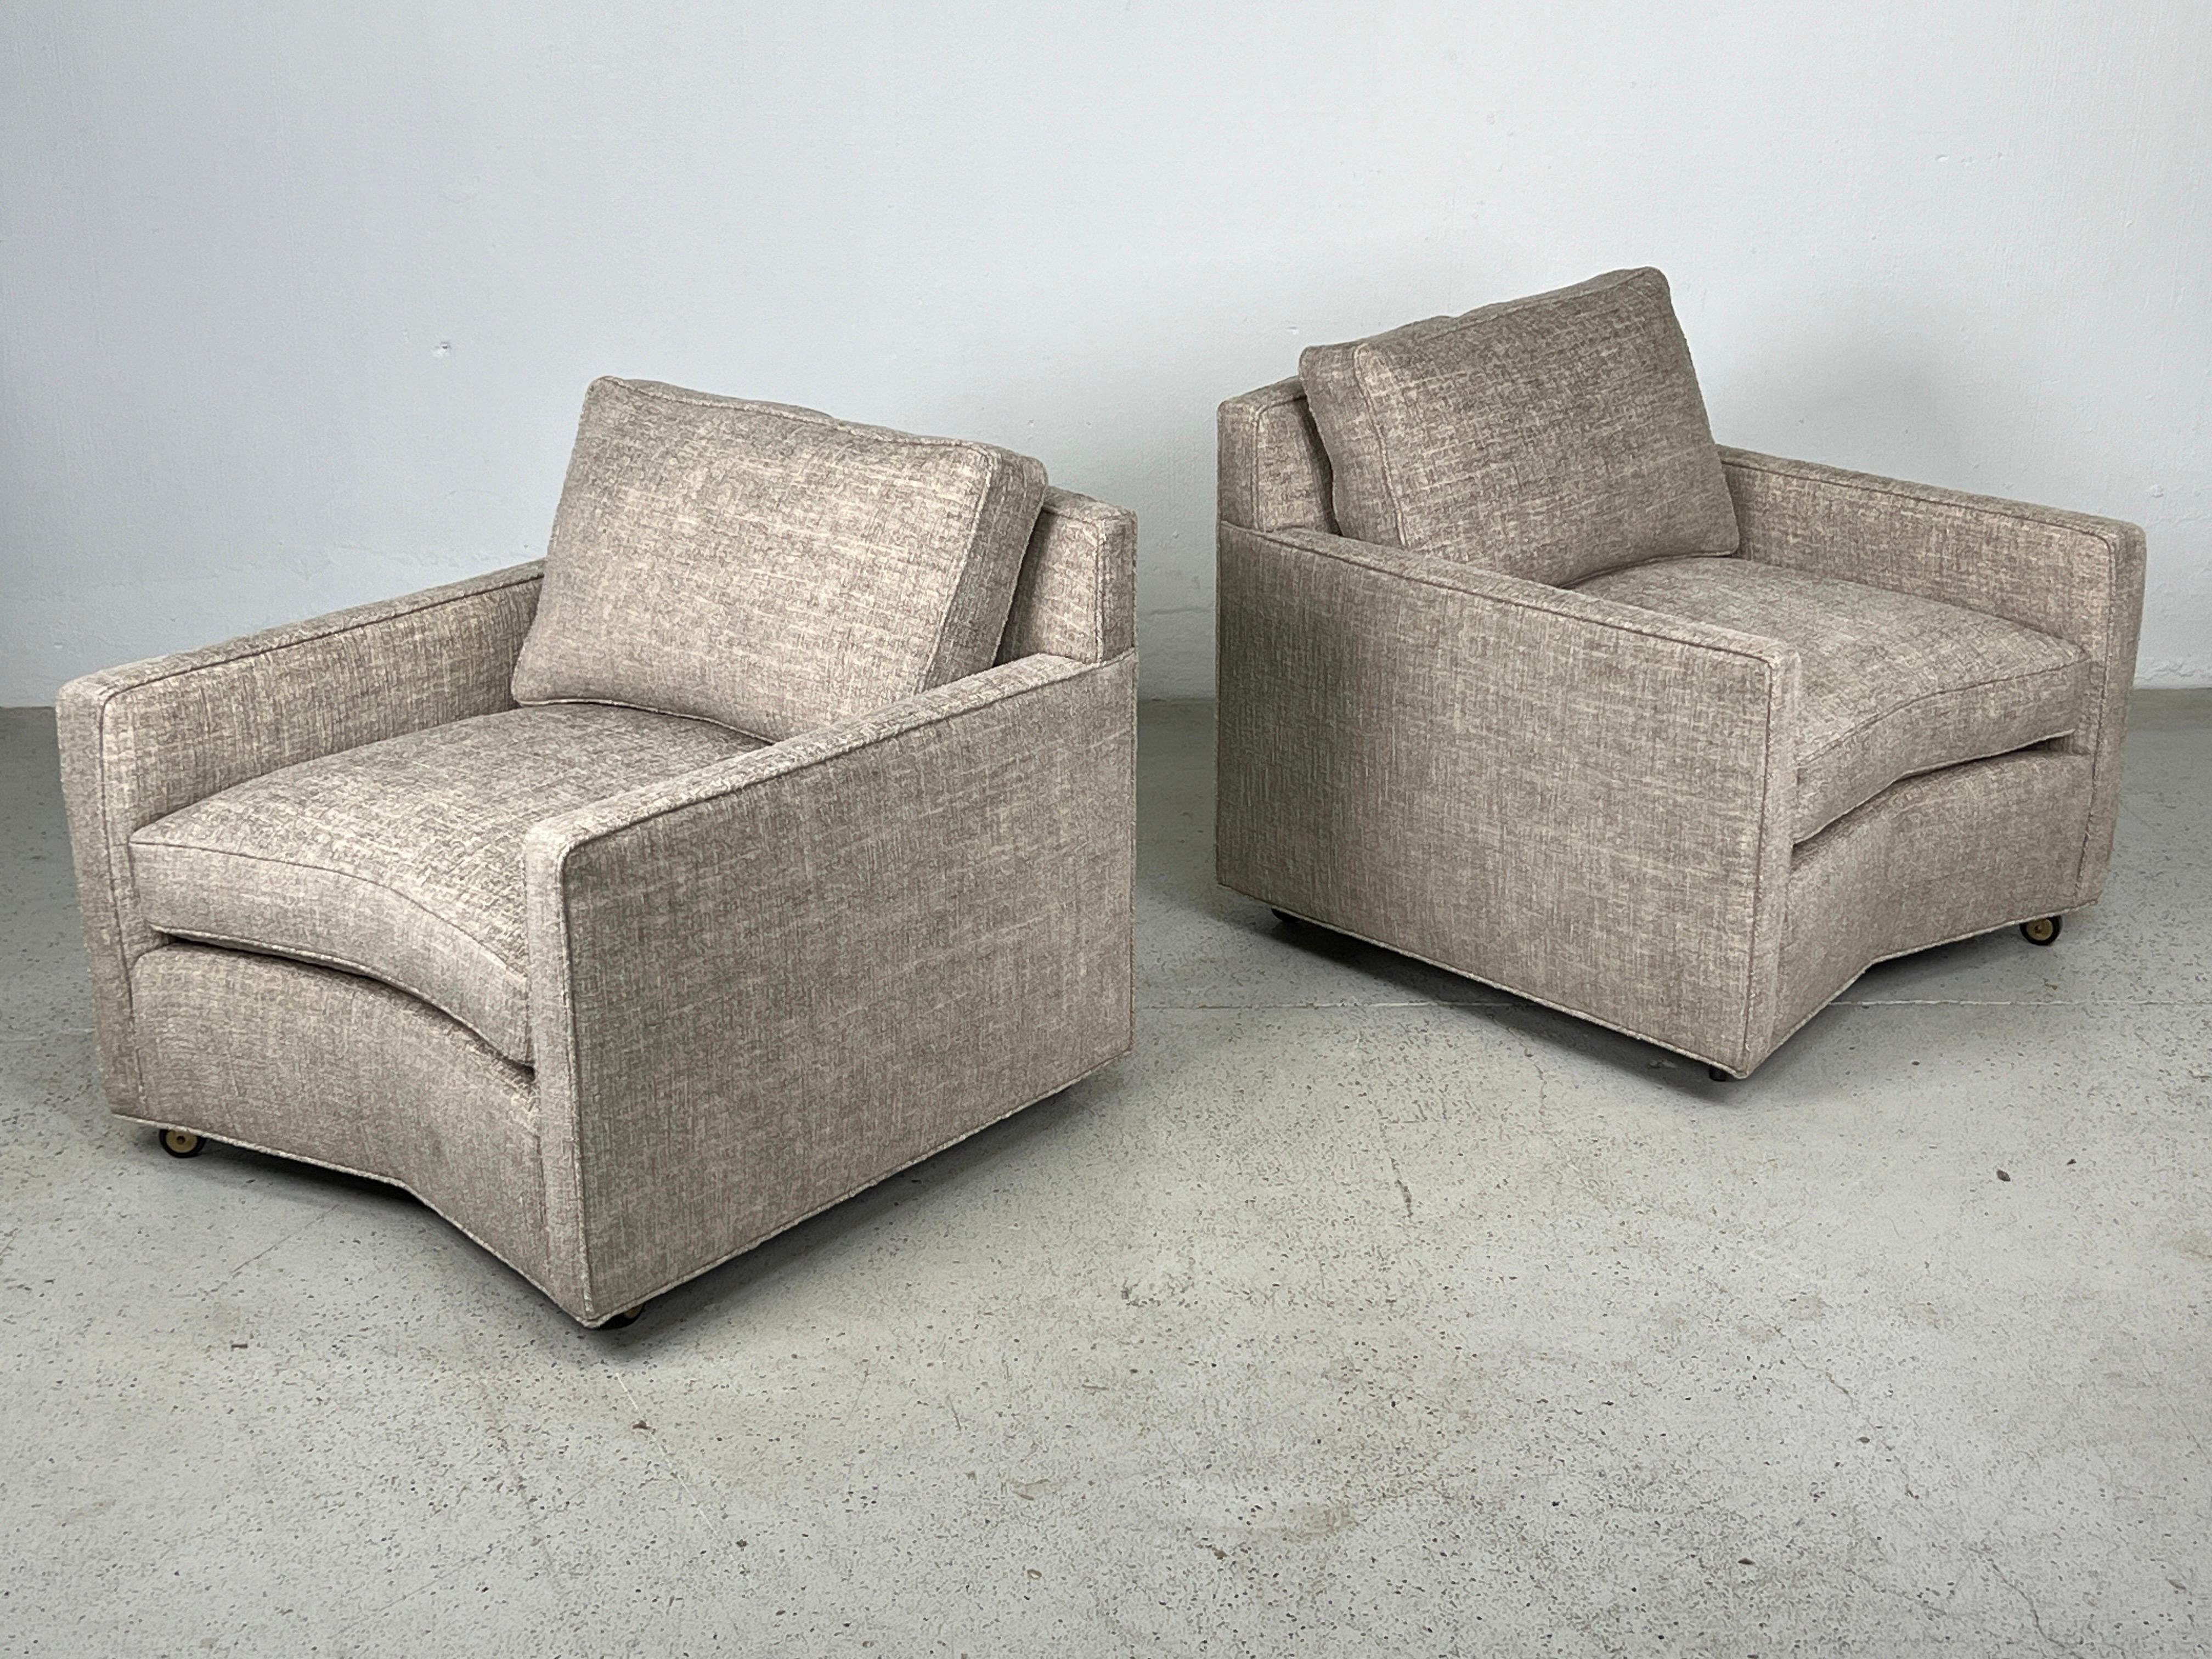 A large scale pair of angled lounge chairs with down cushions by Baker. Fully restored and reupholstered. 